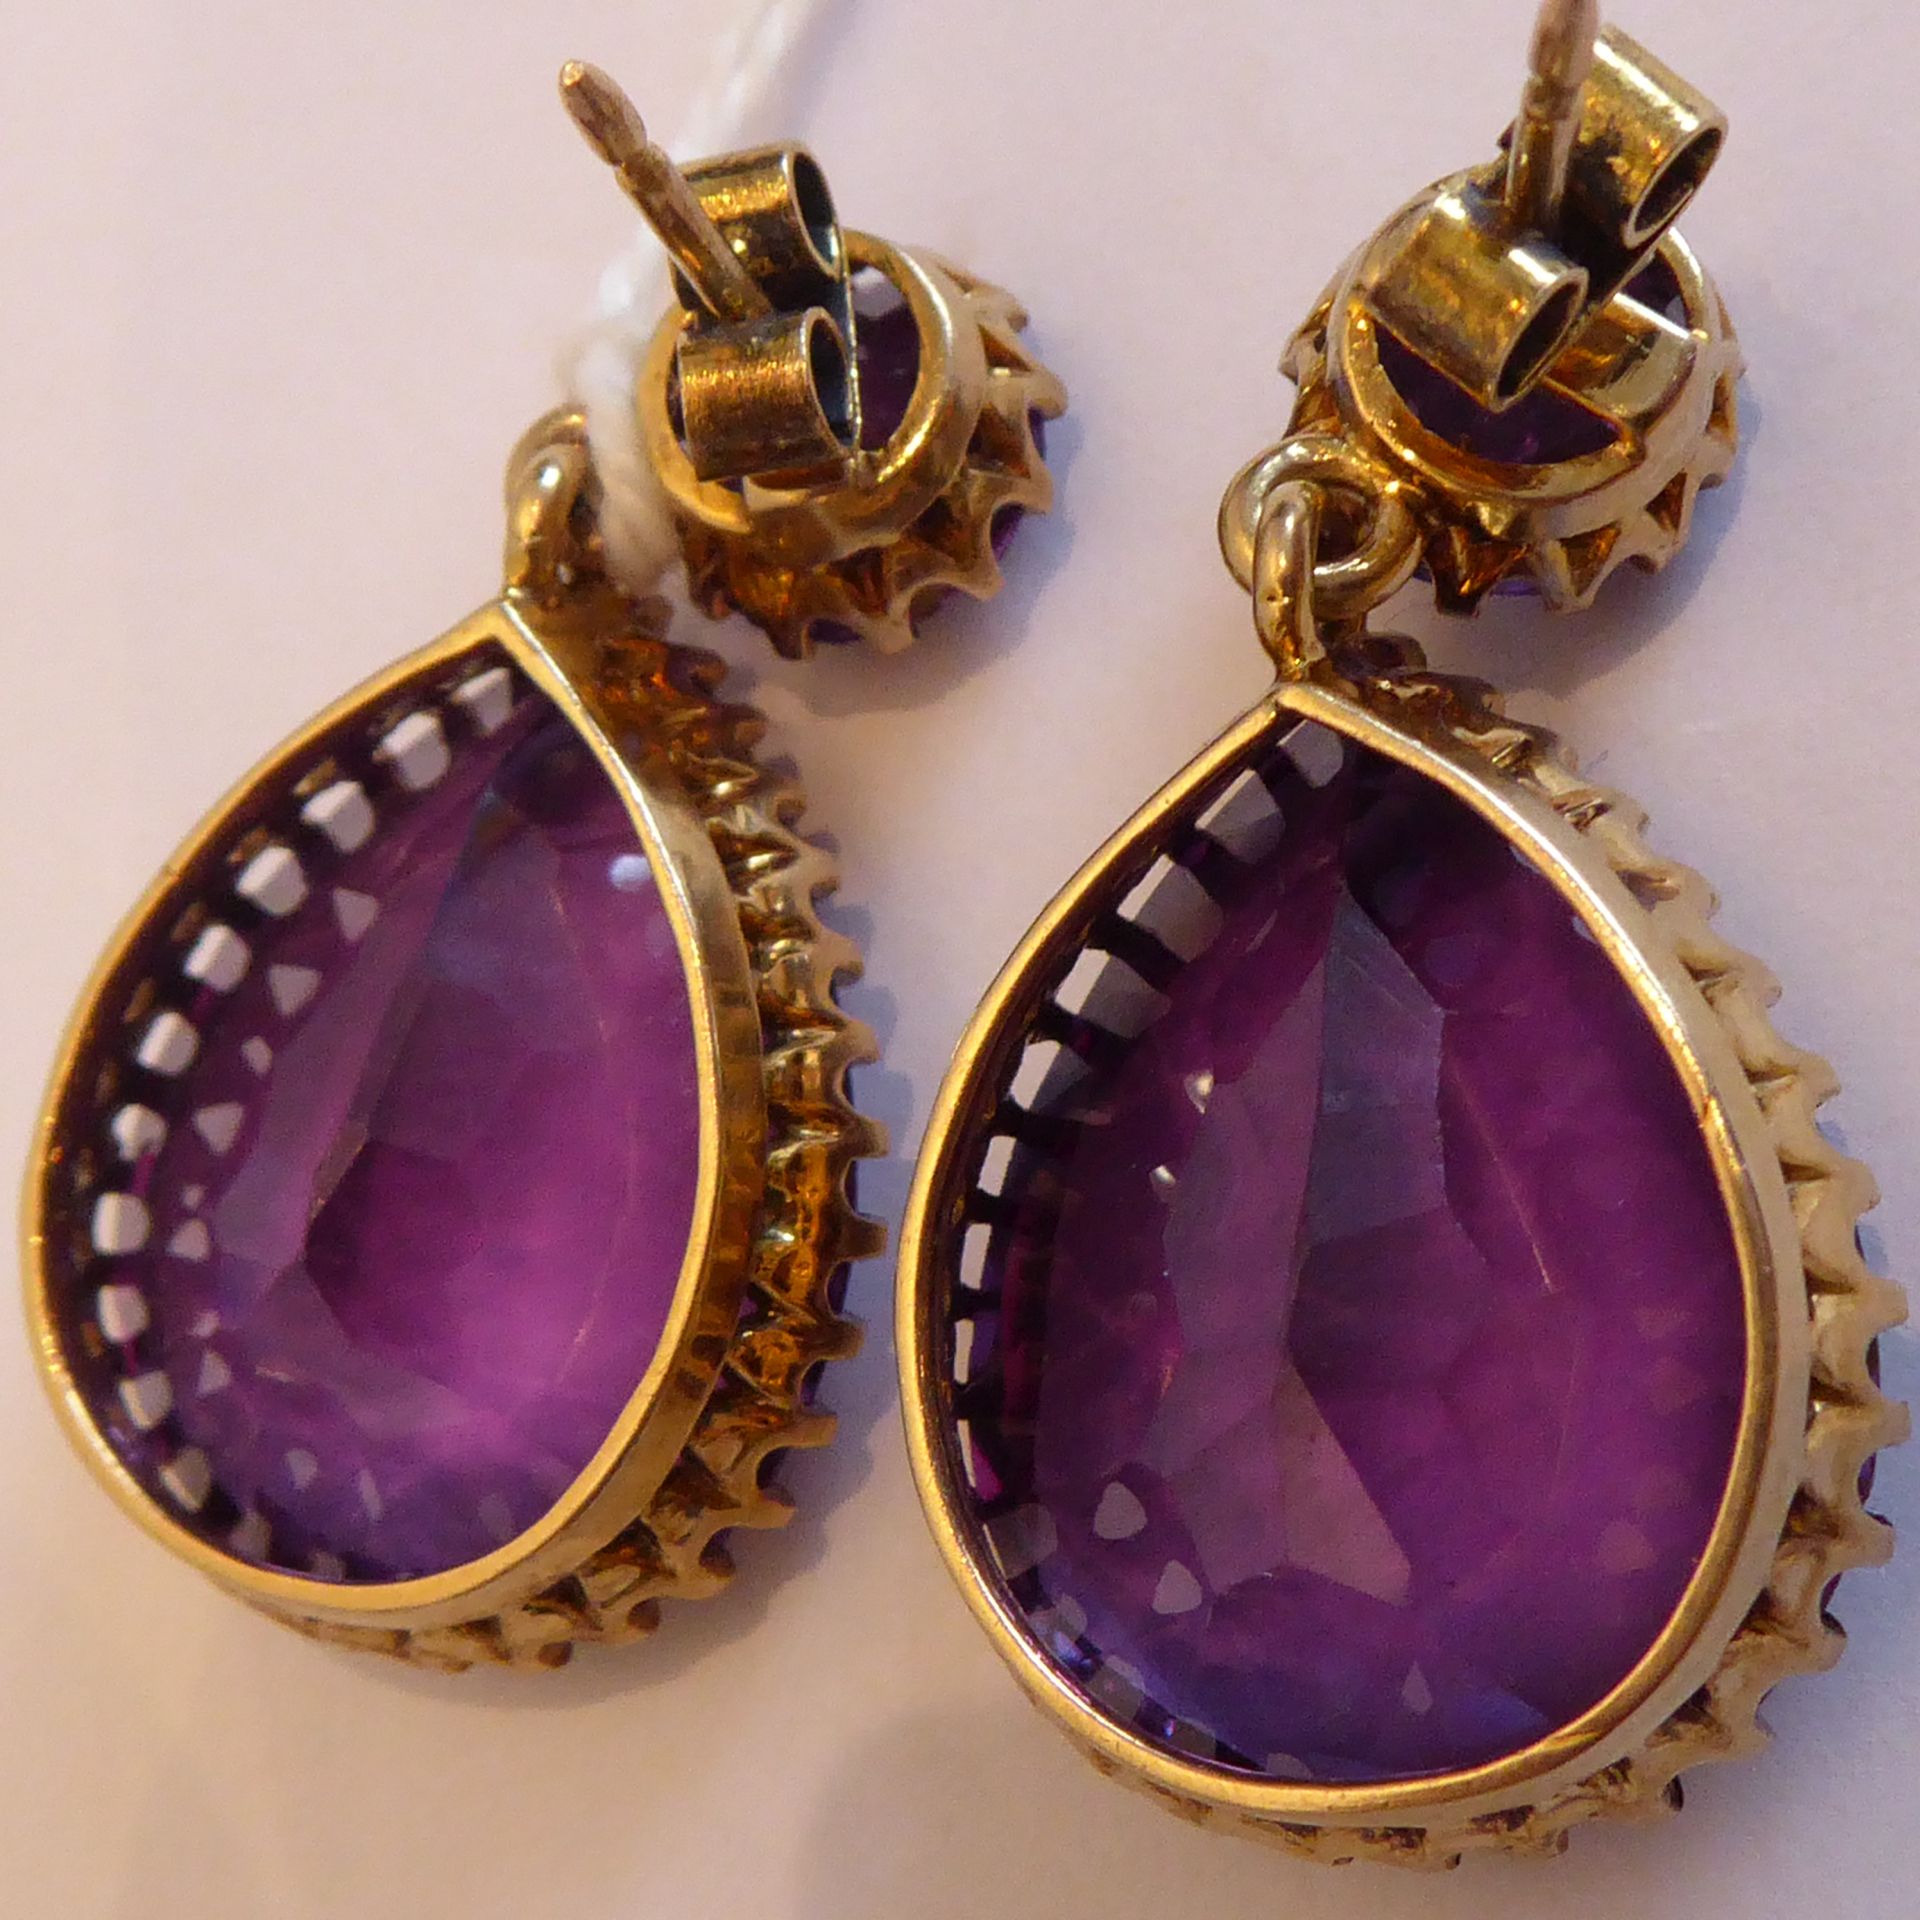 A pair of yellow metal drop earrings set with large pear-shaped hand-cut amethysts - Image 6 of 11